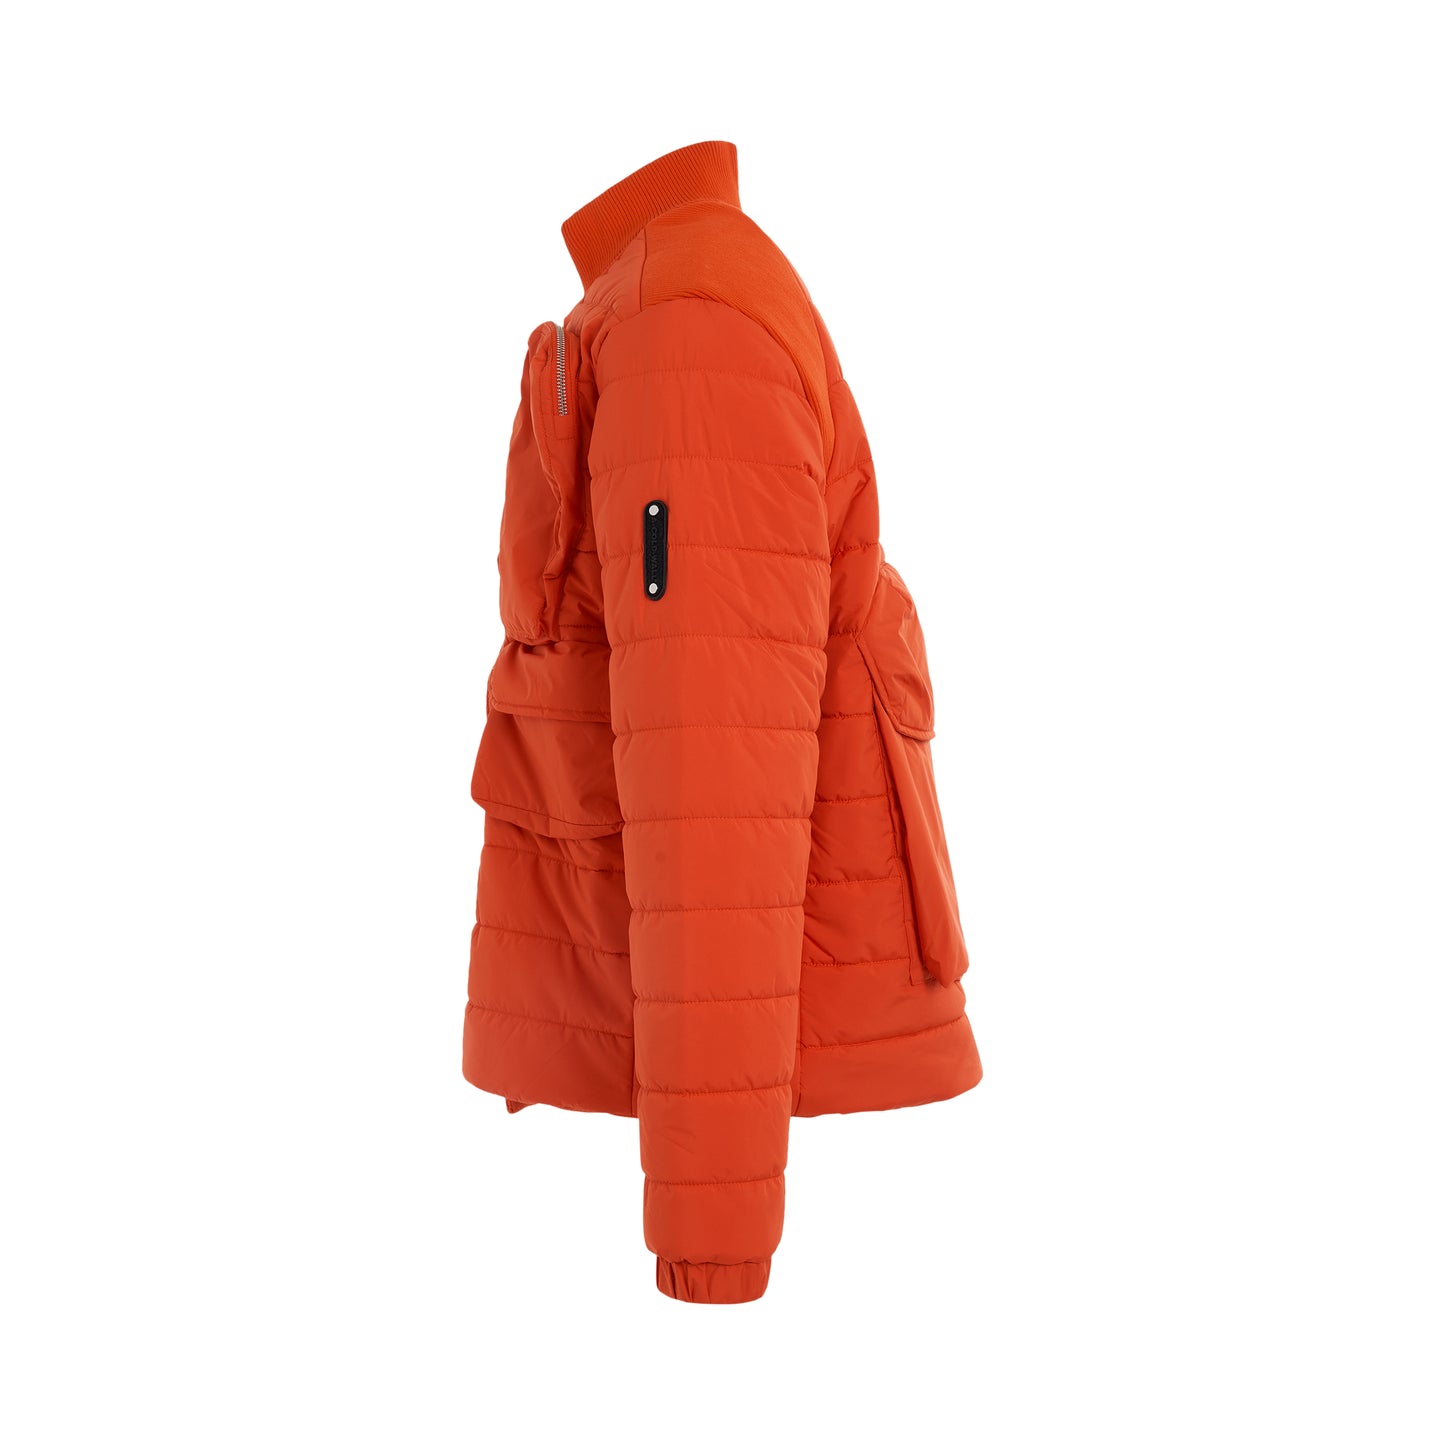 Asymmetric Padded Jacket in Volt Red